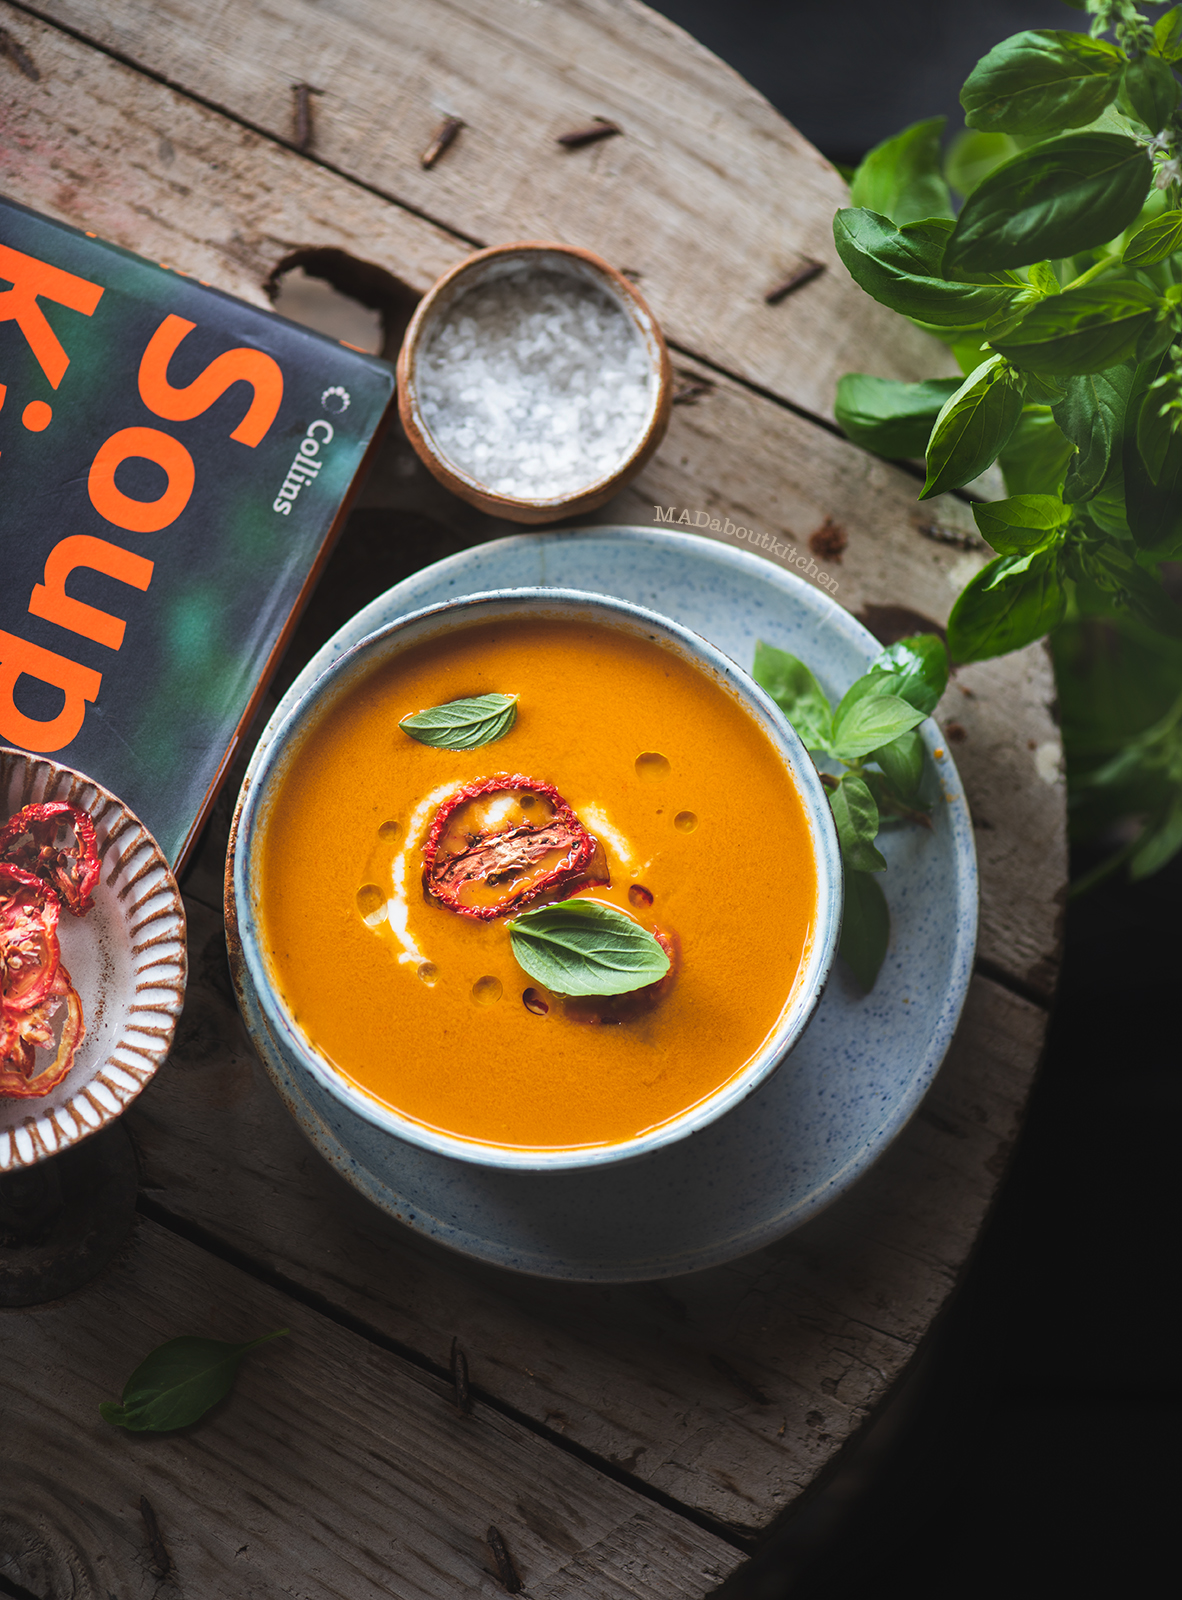 Roasted Tomato Turmeric soup literally takes tossing ingredients on a pan and roasting it in the oven, blending and serving & it is as simple as that.